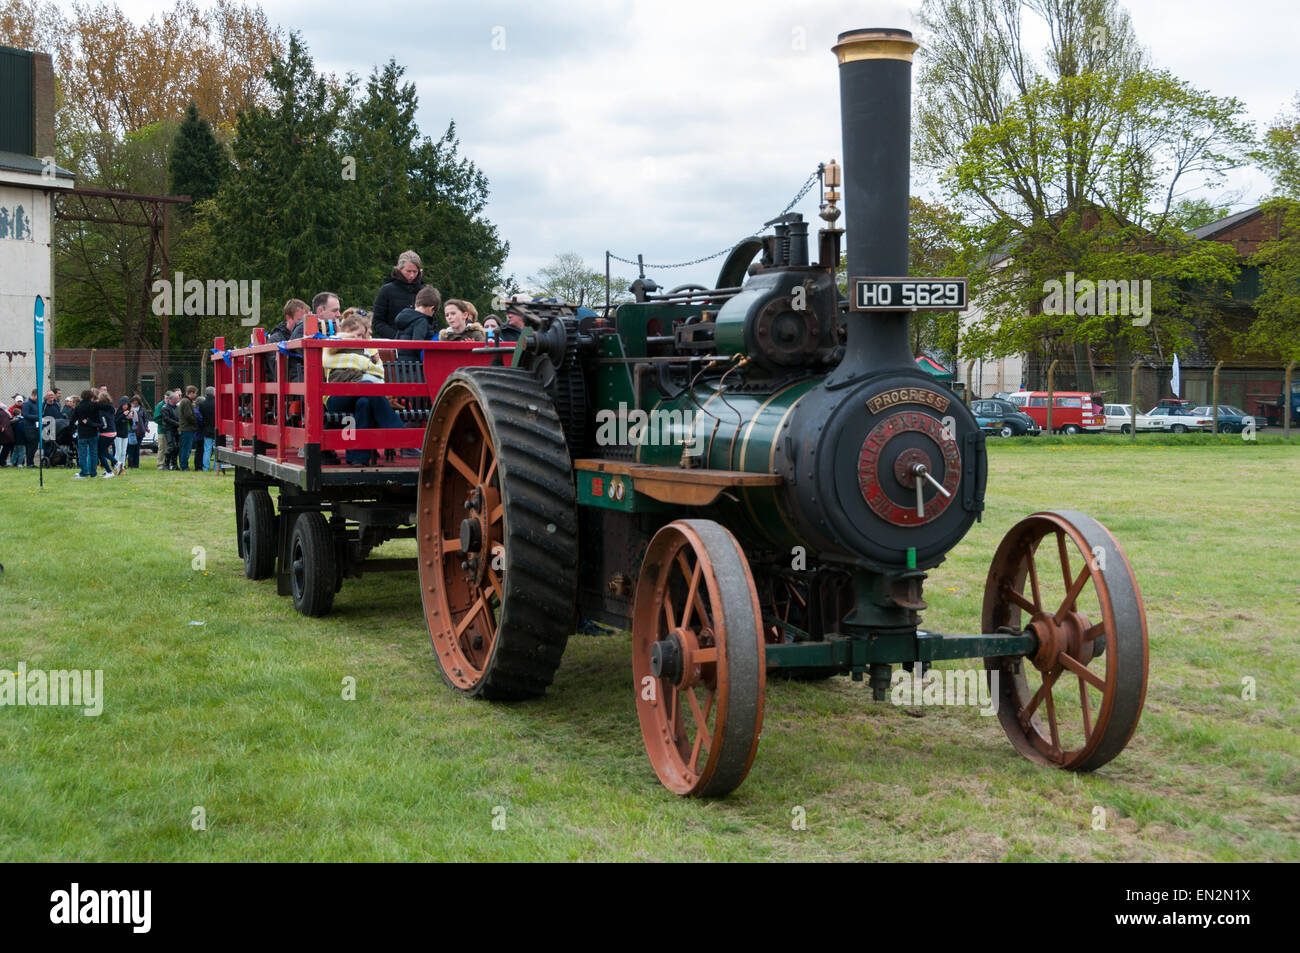 Vintage steam tractor at the 5th Sunday Brunch Scramble in Bicester Heritage, Oxfordshire, England Stock Photo